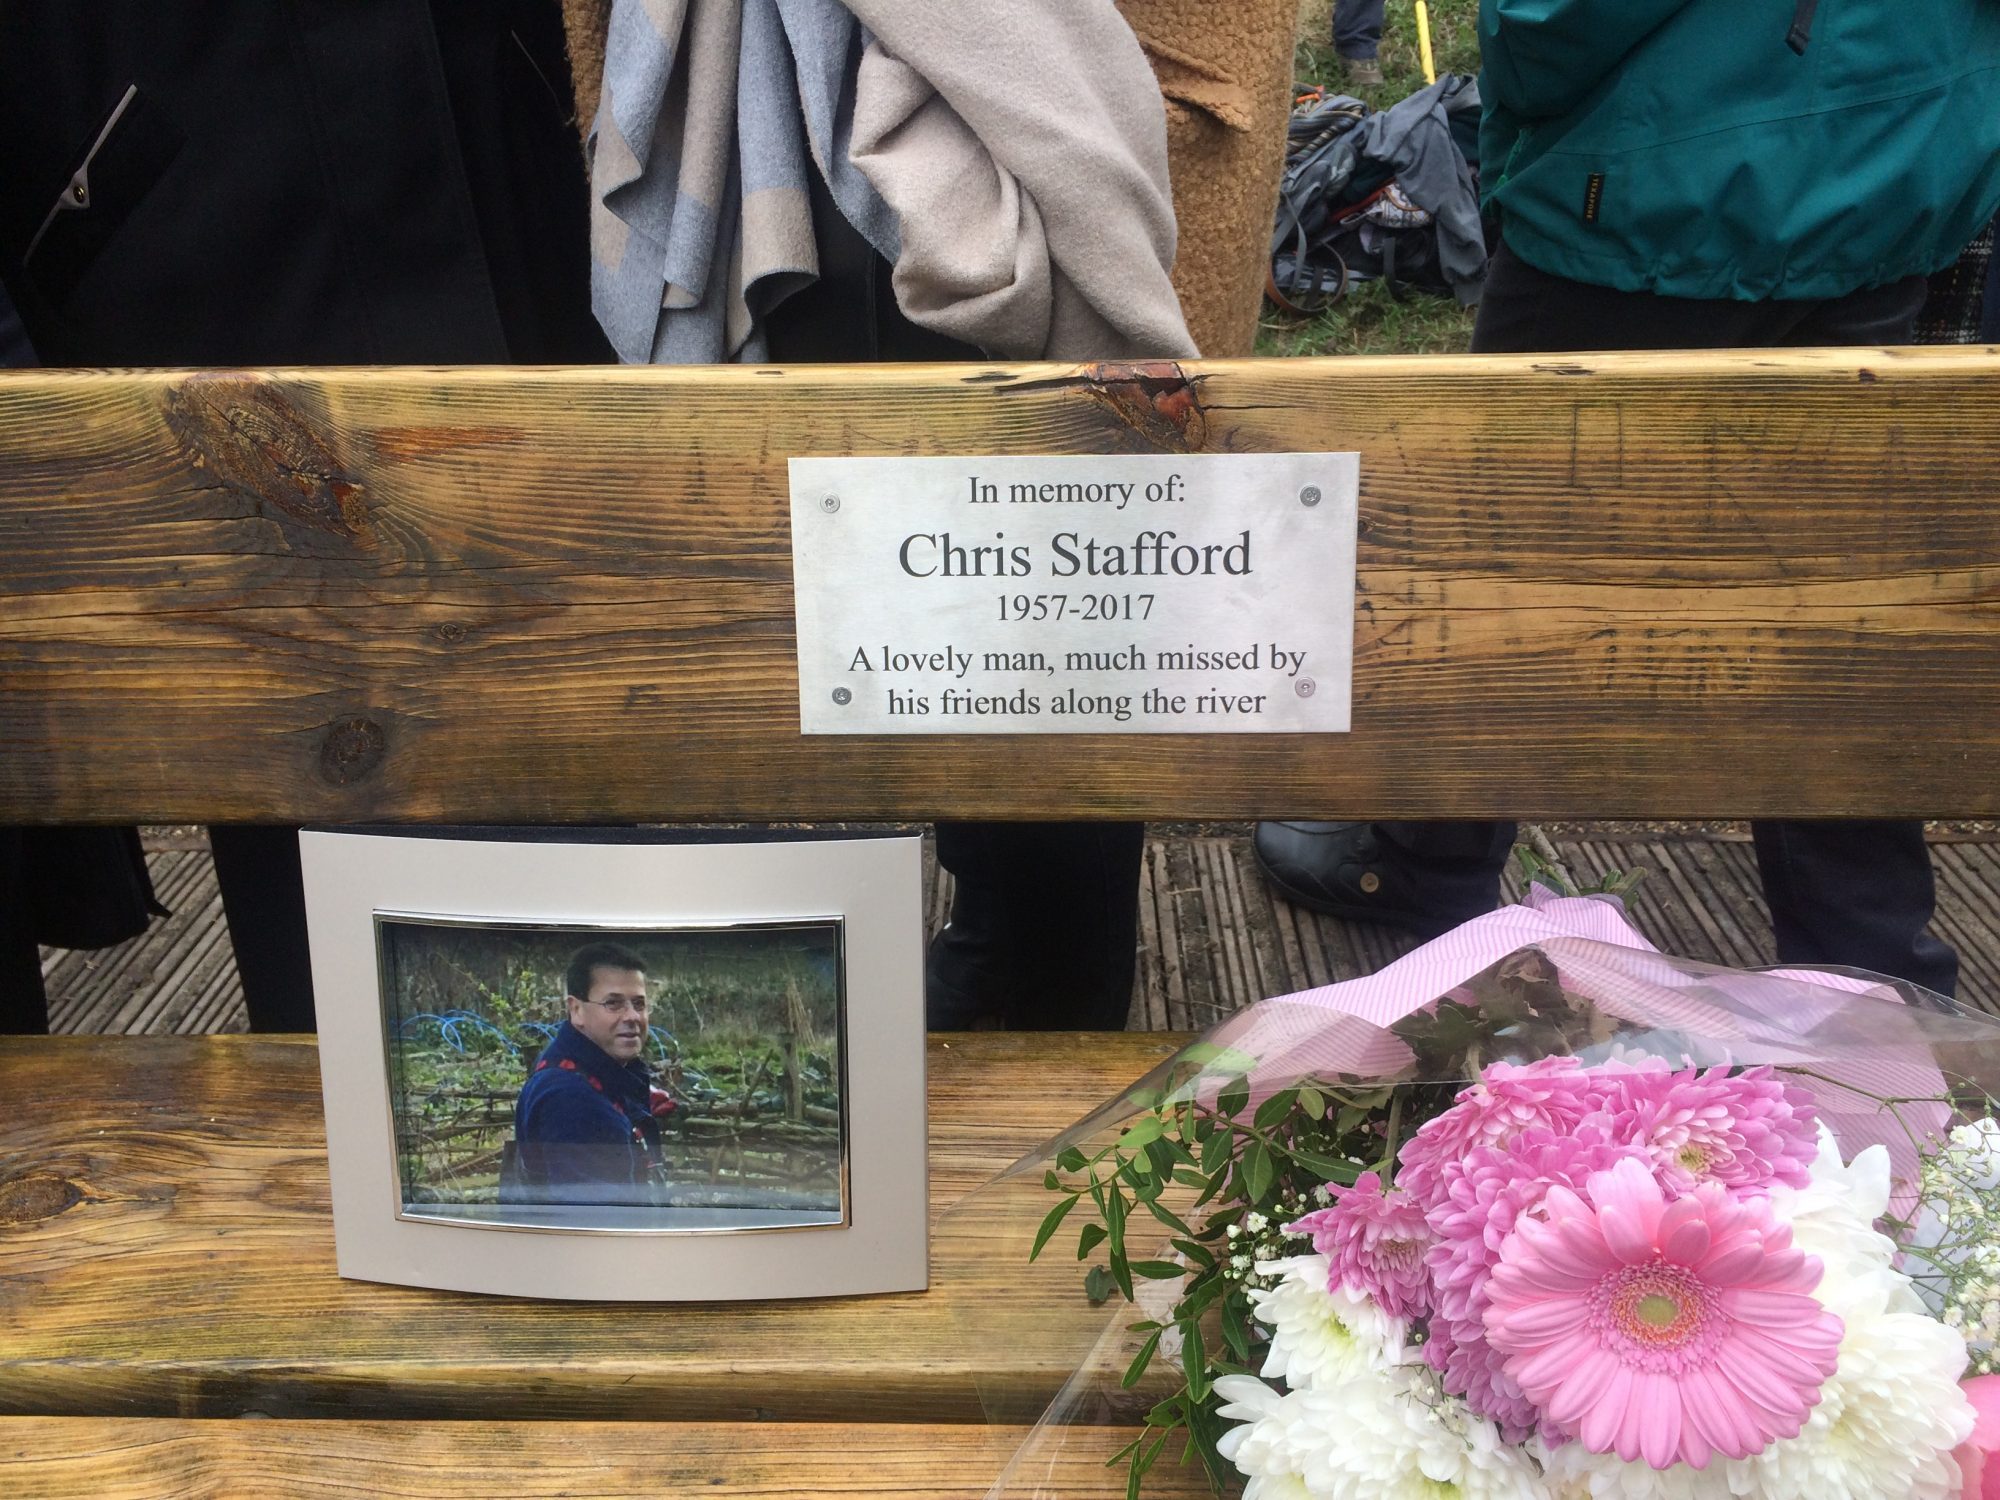 The memorial bench in memory of Christ Stafford